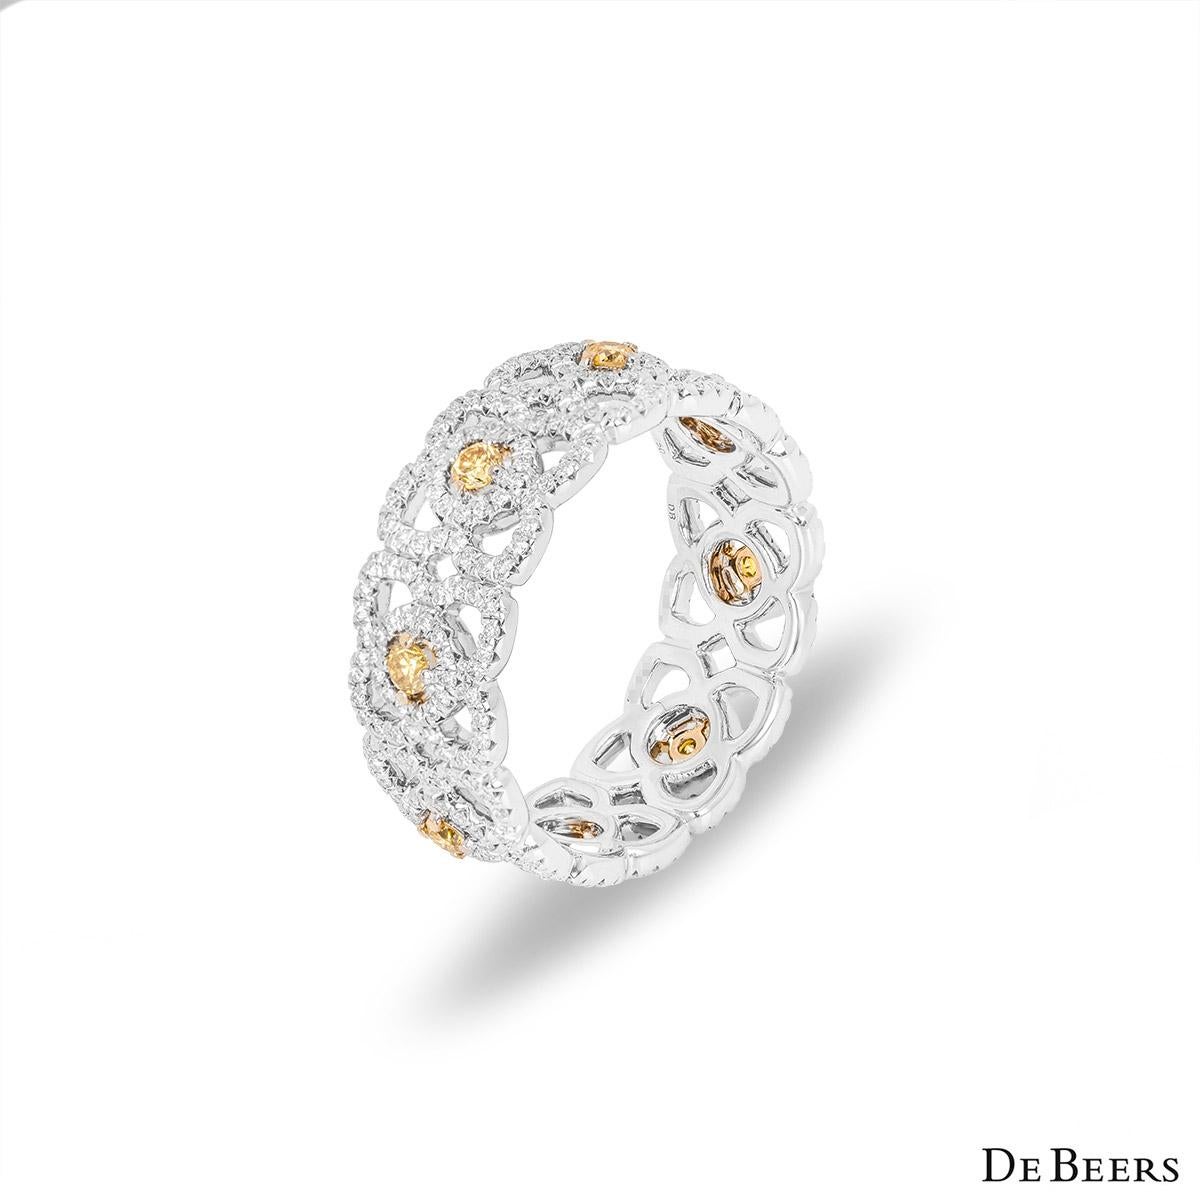 A mesmerizing 18k white gold diamond ring by De Beers from the Enchanted Lotus collection. The band is set with 8 lotus motifs set to the centre with a round brilliant cut yellow diamond with an approximate total weight of 0.40ct. Complementing the